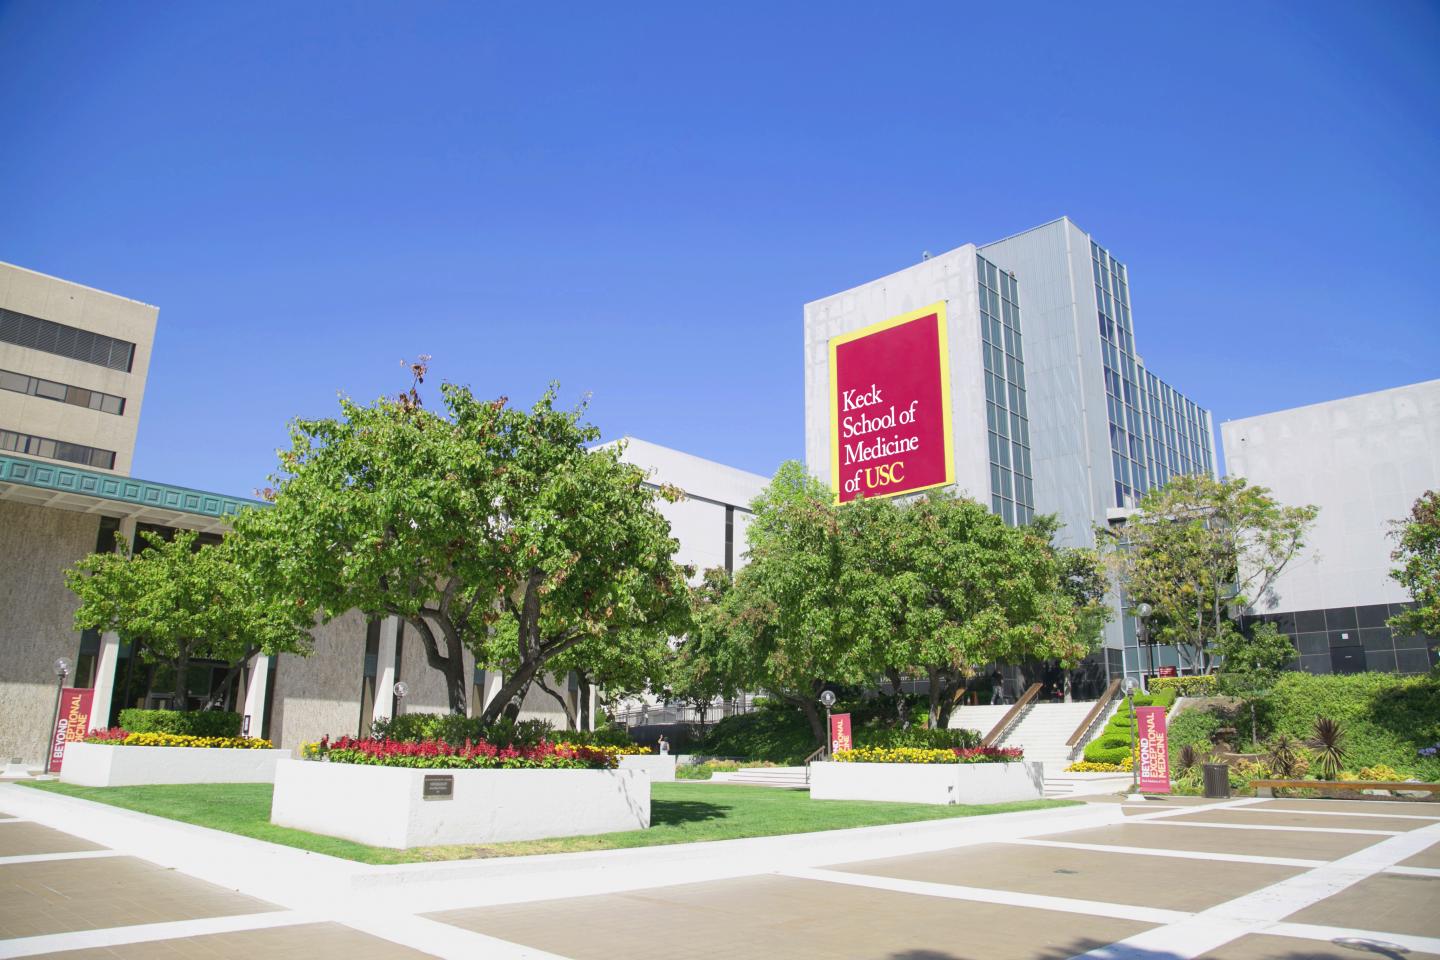 How to Get Into USC Keck School of Medicine: The Definitive Guide